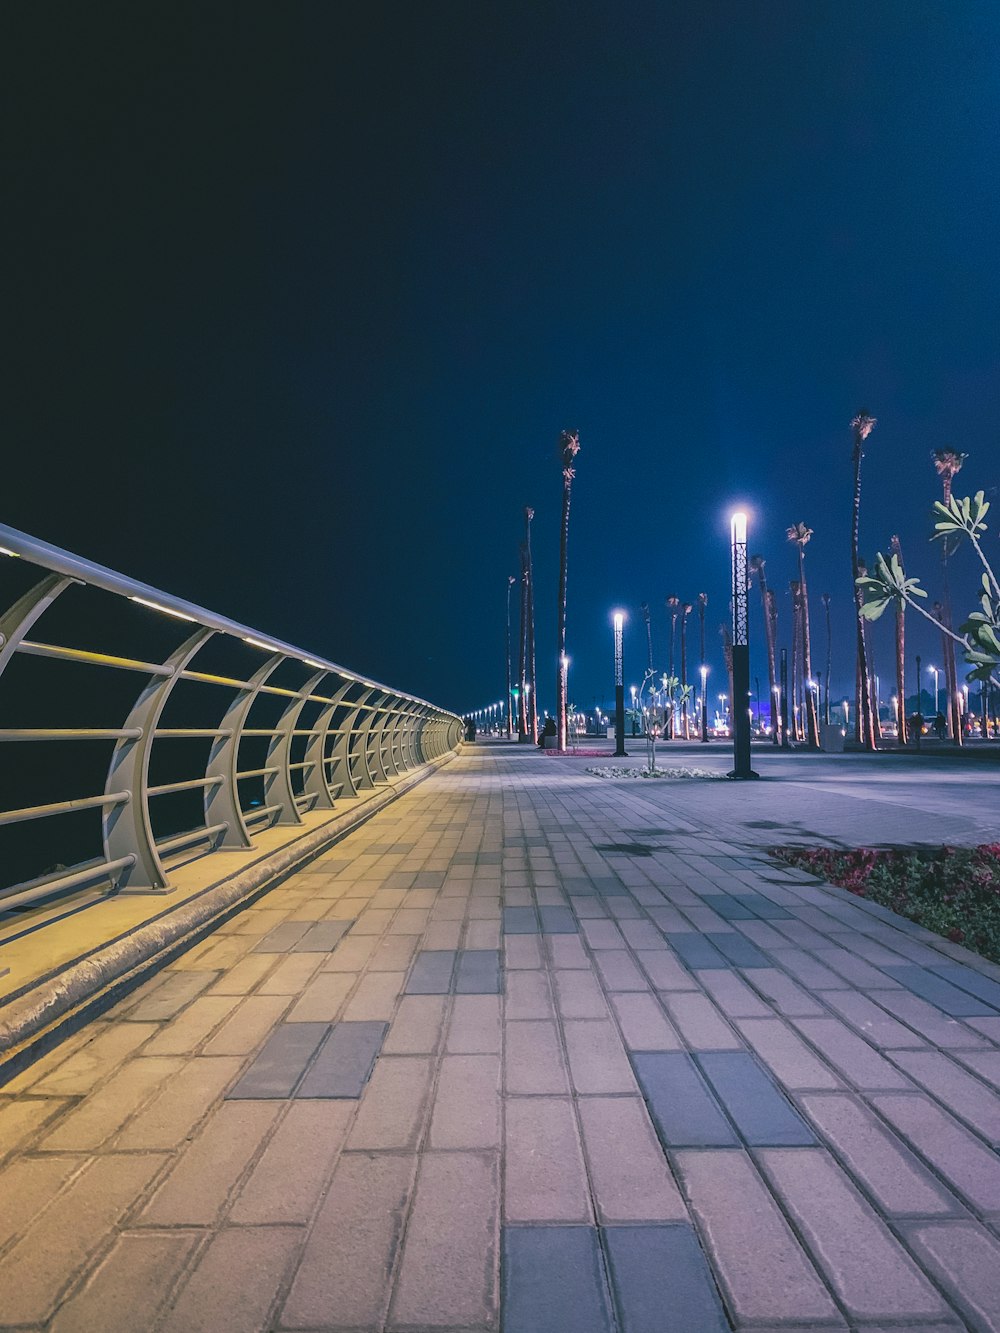 gray concrete pathway with gray metal railings during night time